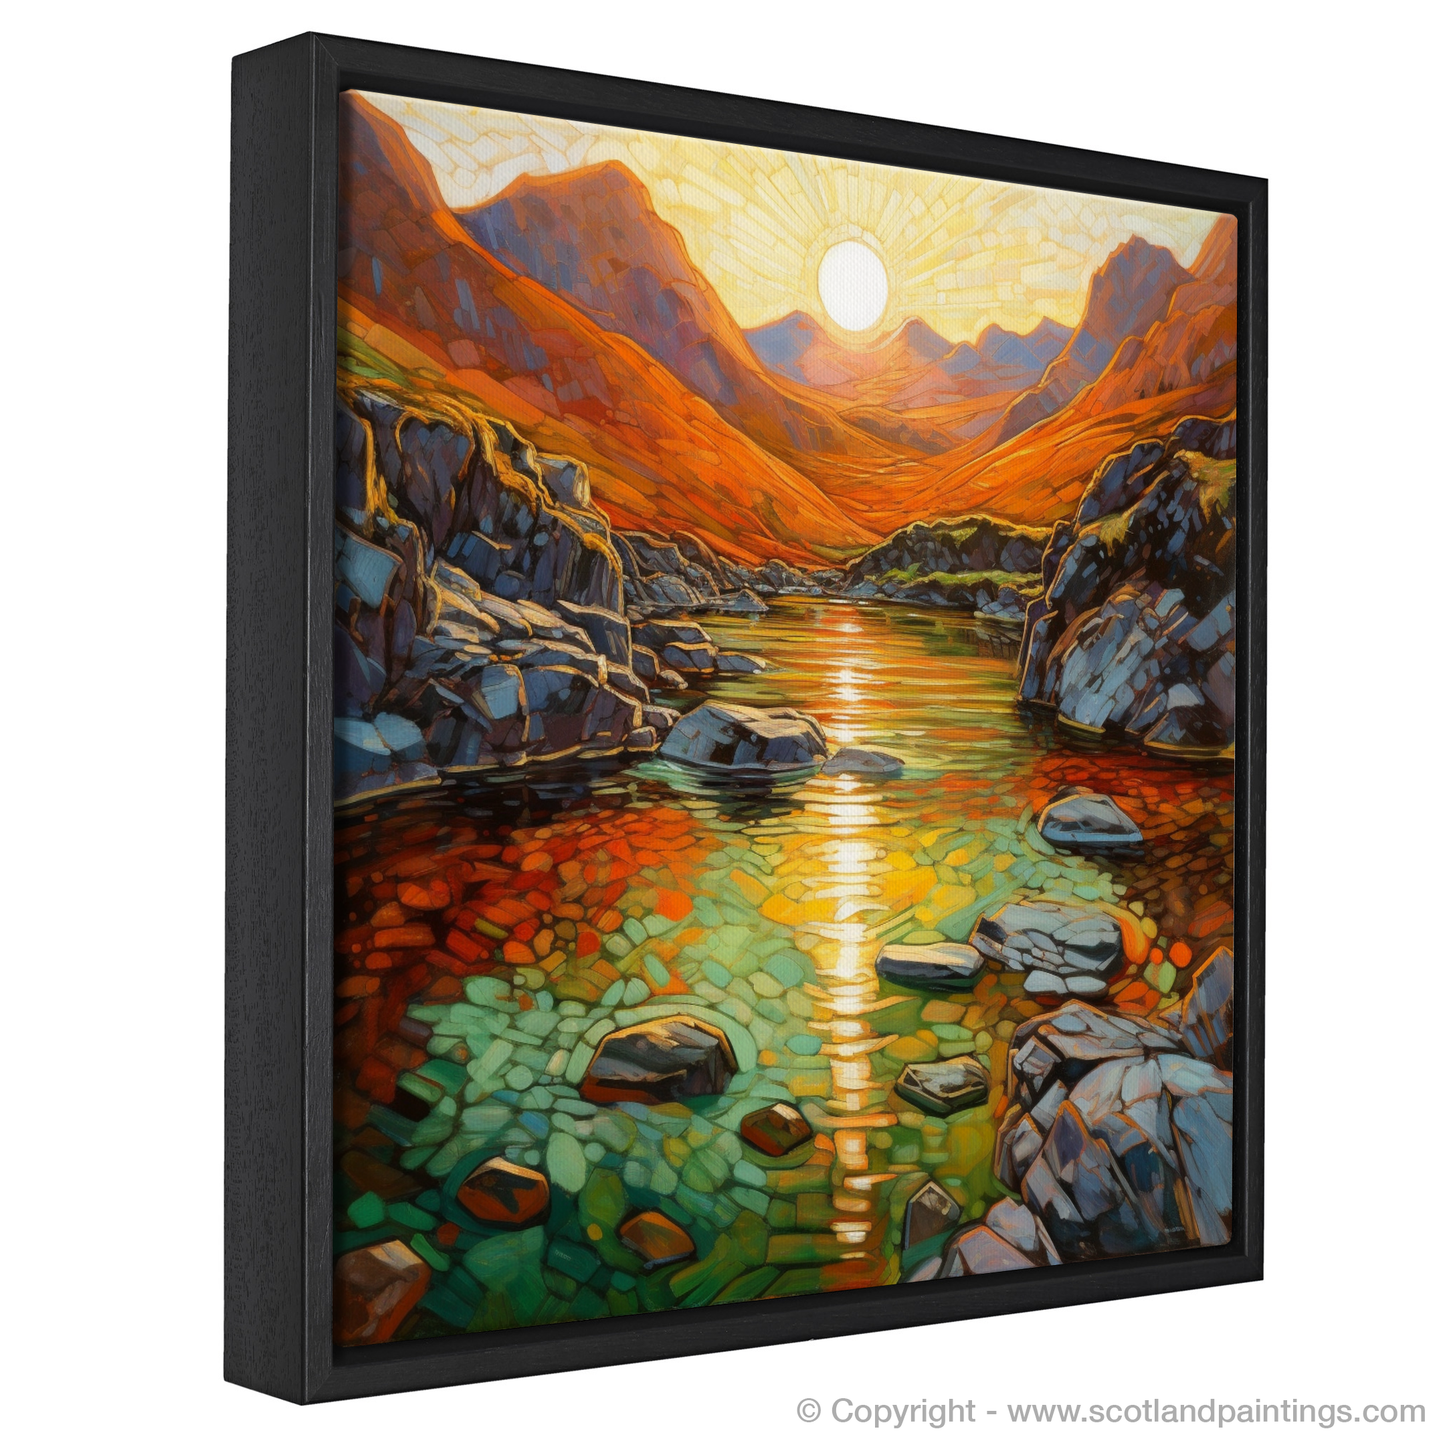 Golden Hour at the Fairy Pools: A Modern Impressionist Tribute to Skye's Majestic Beauty